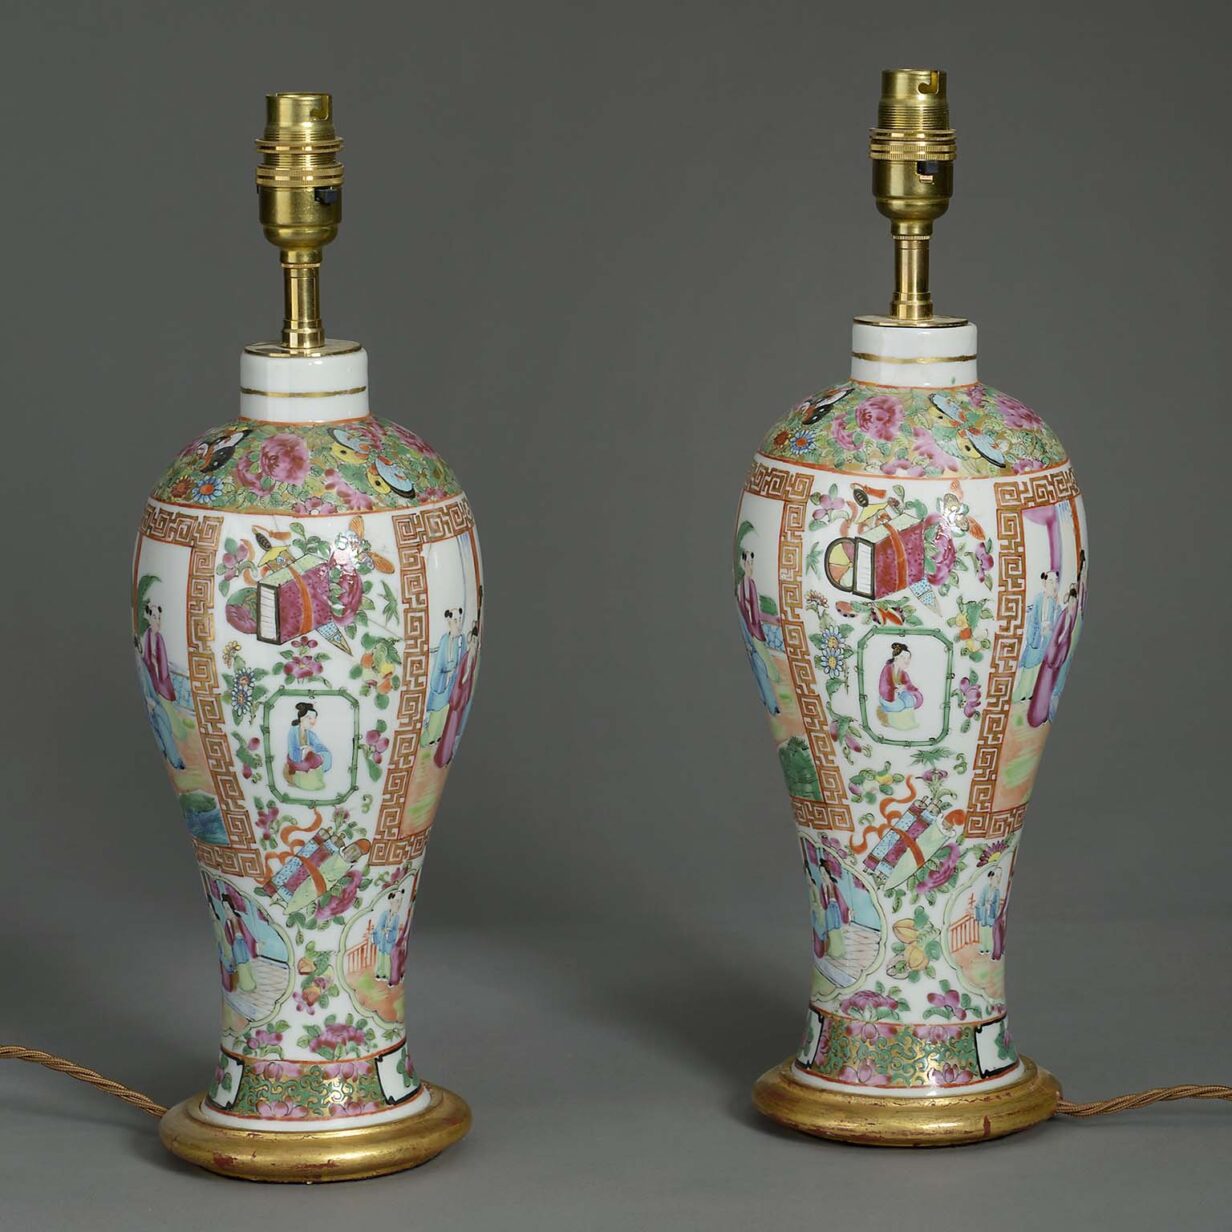 Pair of 19th century canton porcelain table lamps